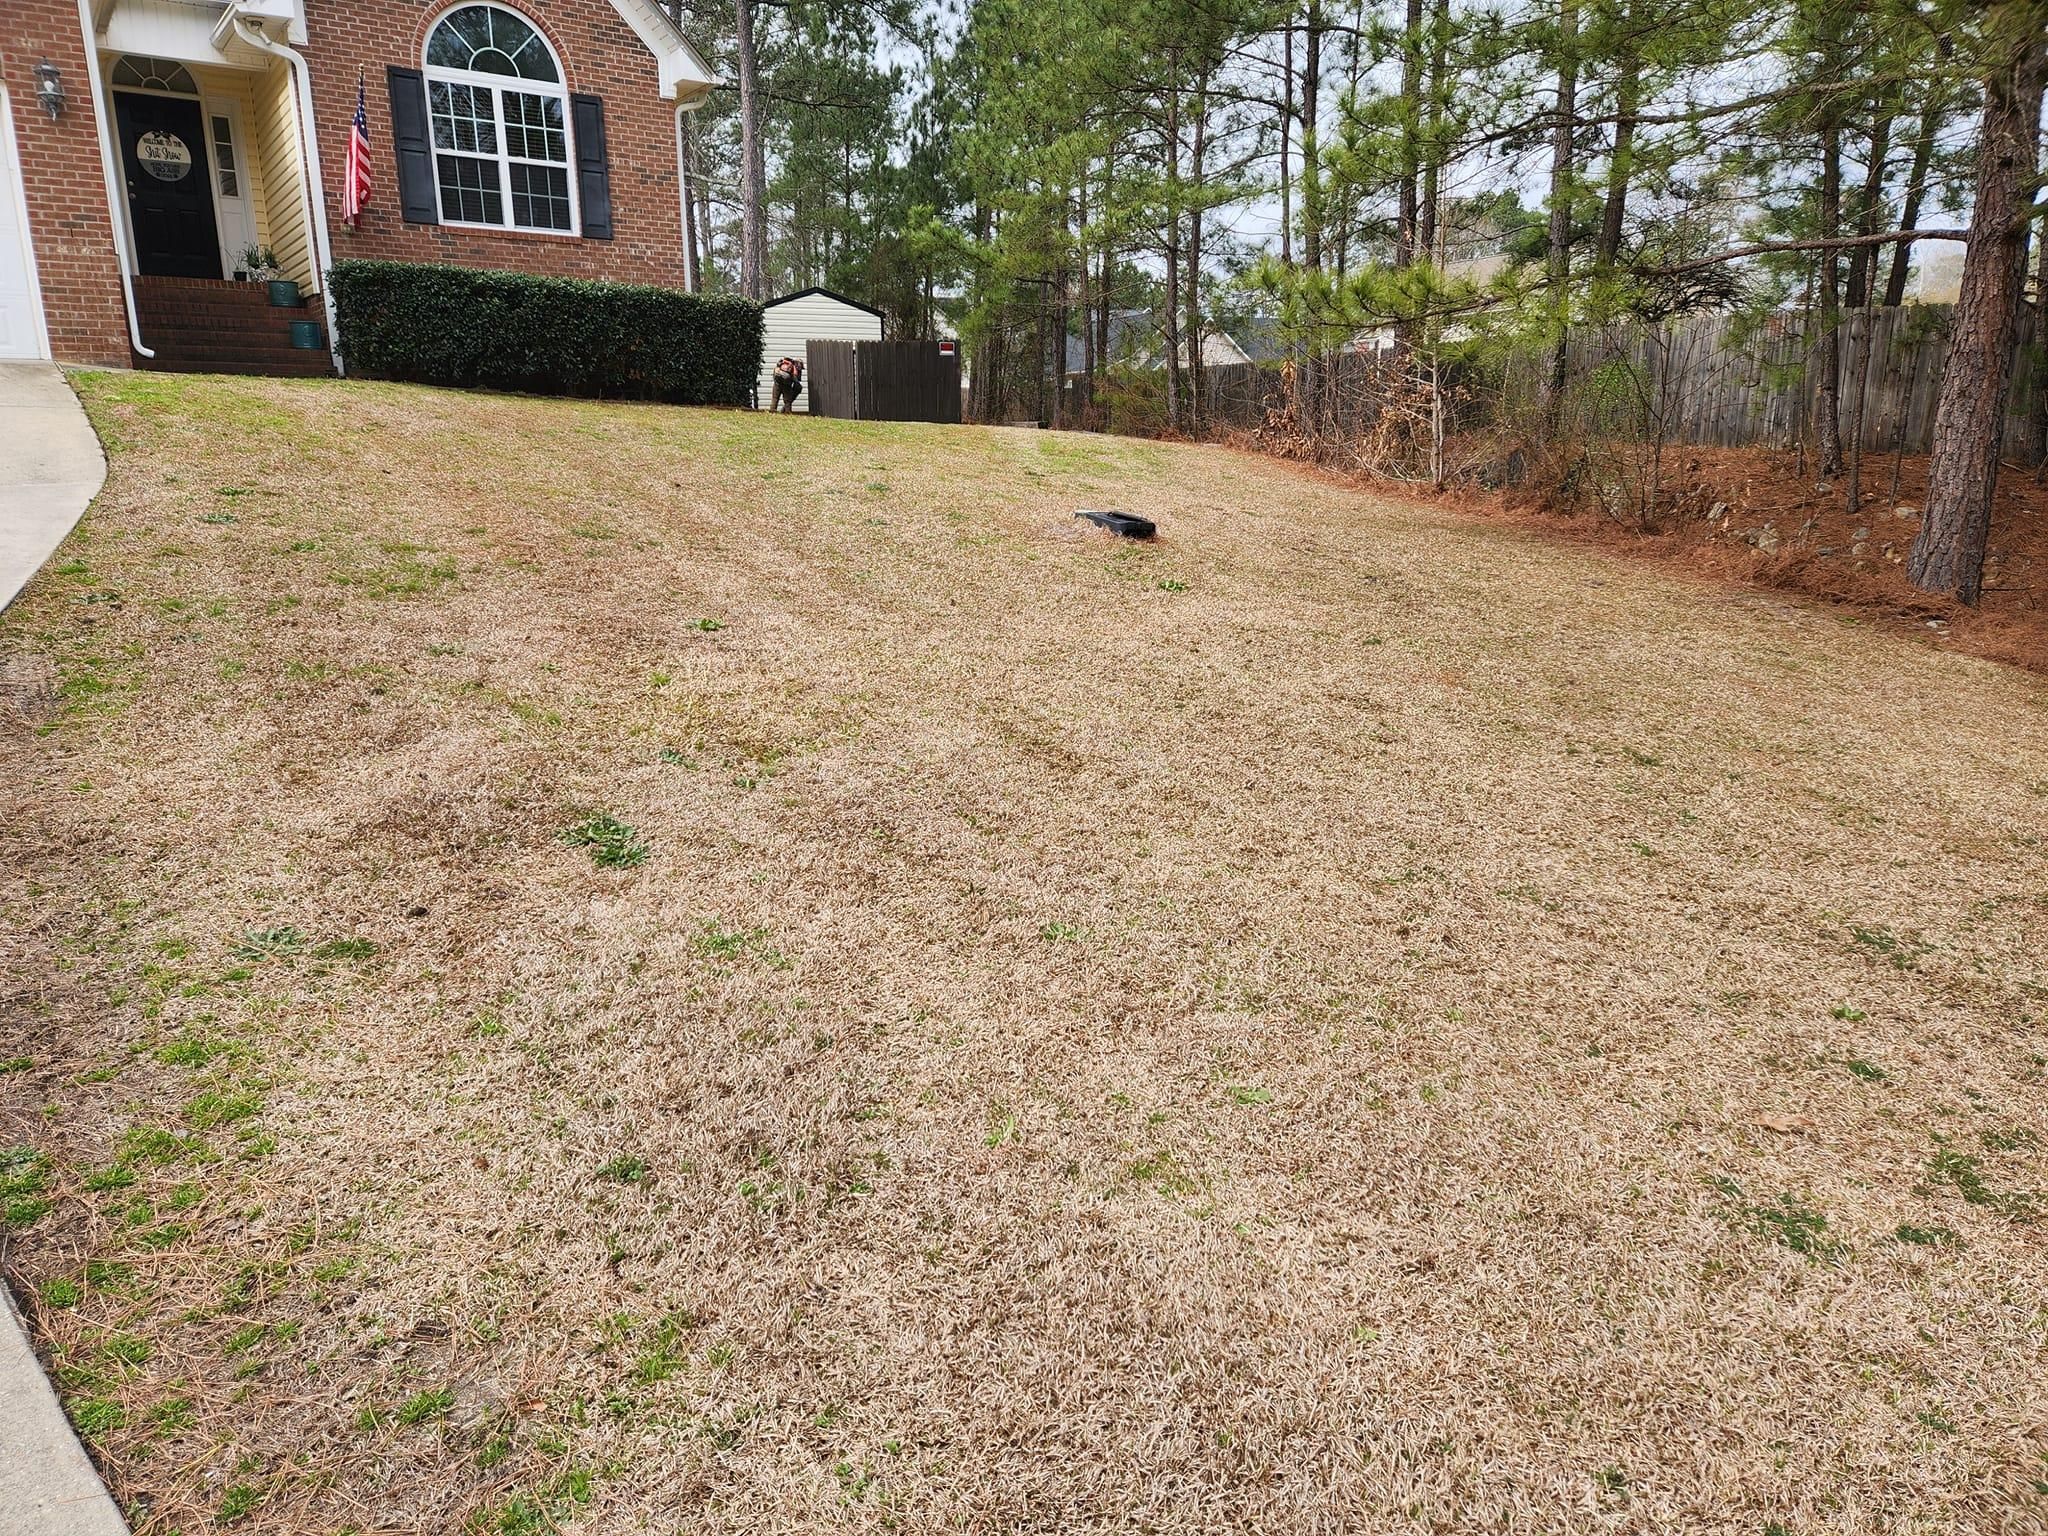 All Photos for South Montanez Lawn Care in Fayetteville, NC